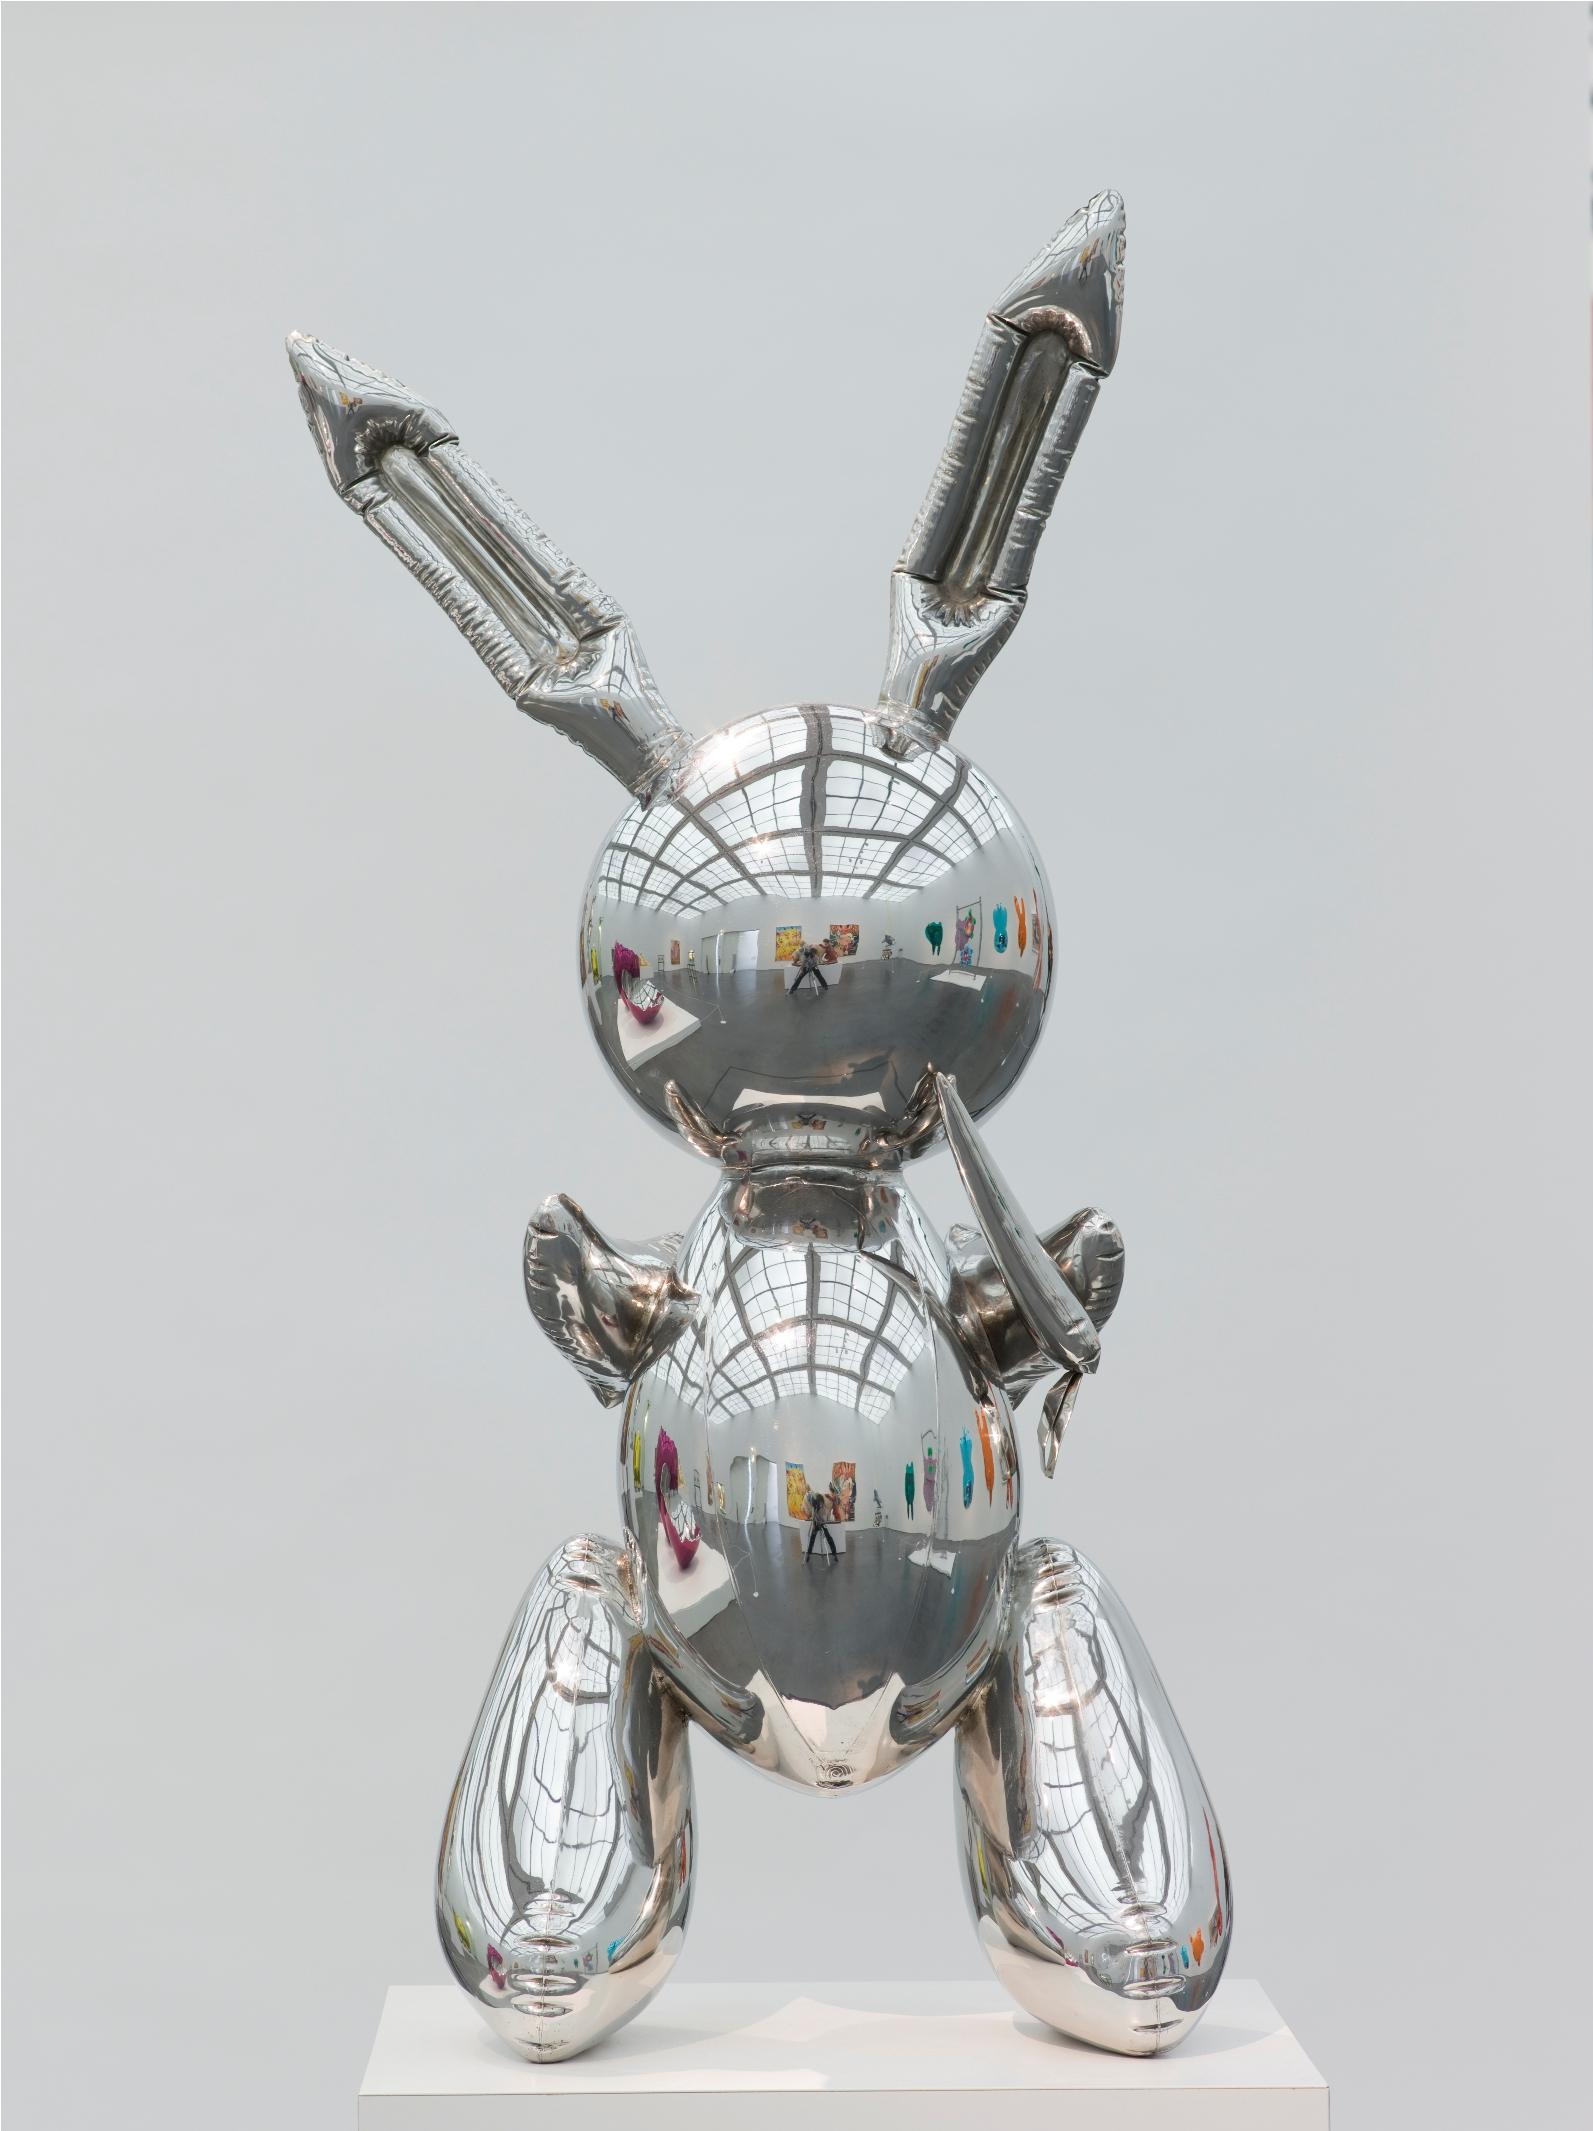 A sculpture that resembles a rabbit-shaped mylar balloon stands on a pedestal. A museum gallery is visible in the sculpture's reflective surface.